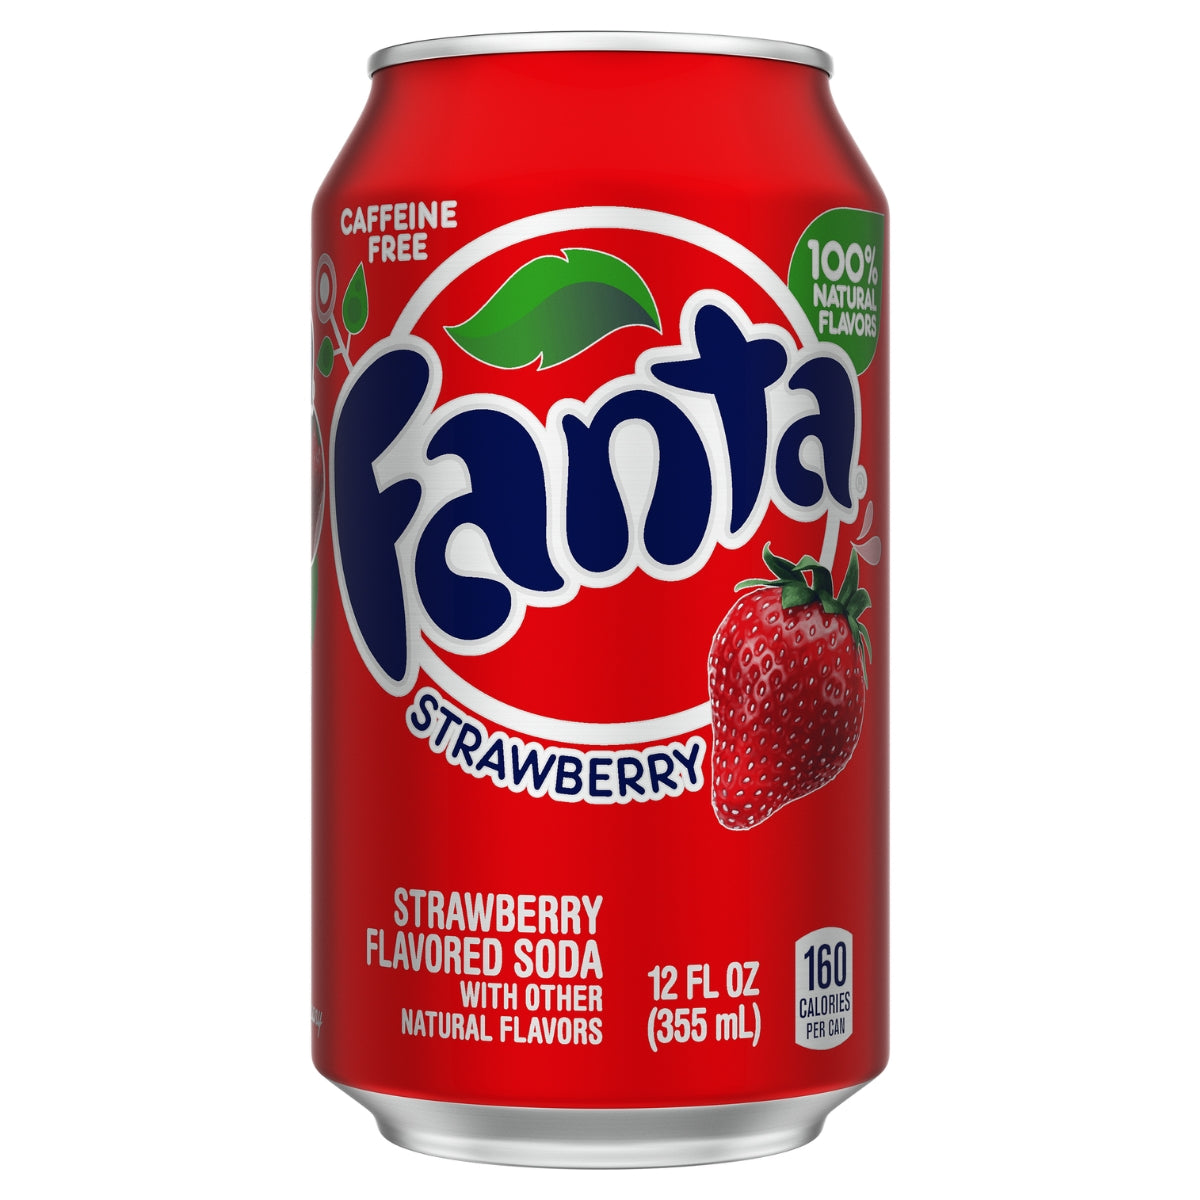 A Fanta - Strawberry Can (America) - 355ml with a red background, displaying a strawberry graphic and highlighting "100% natural flavors" and "160 calories per can.